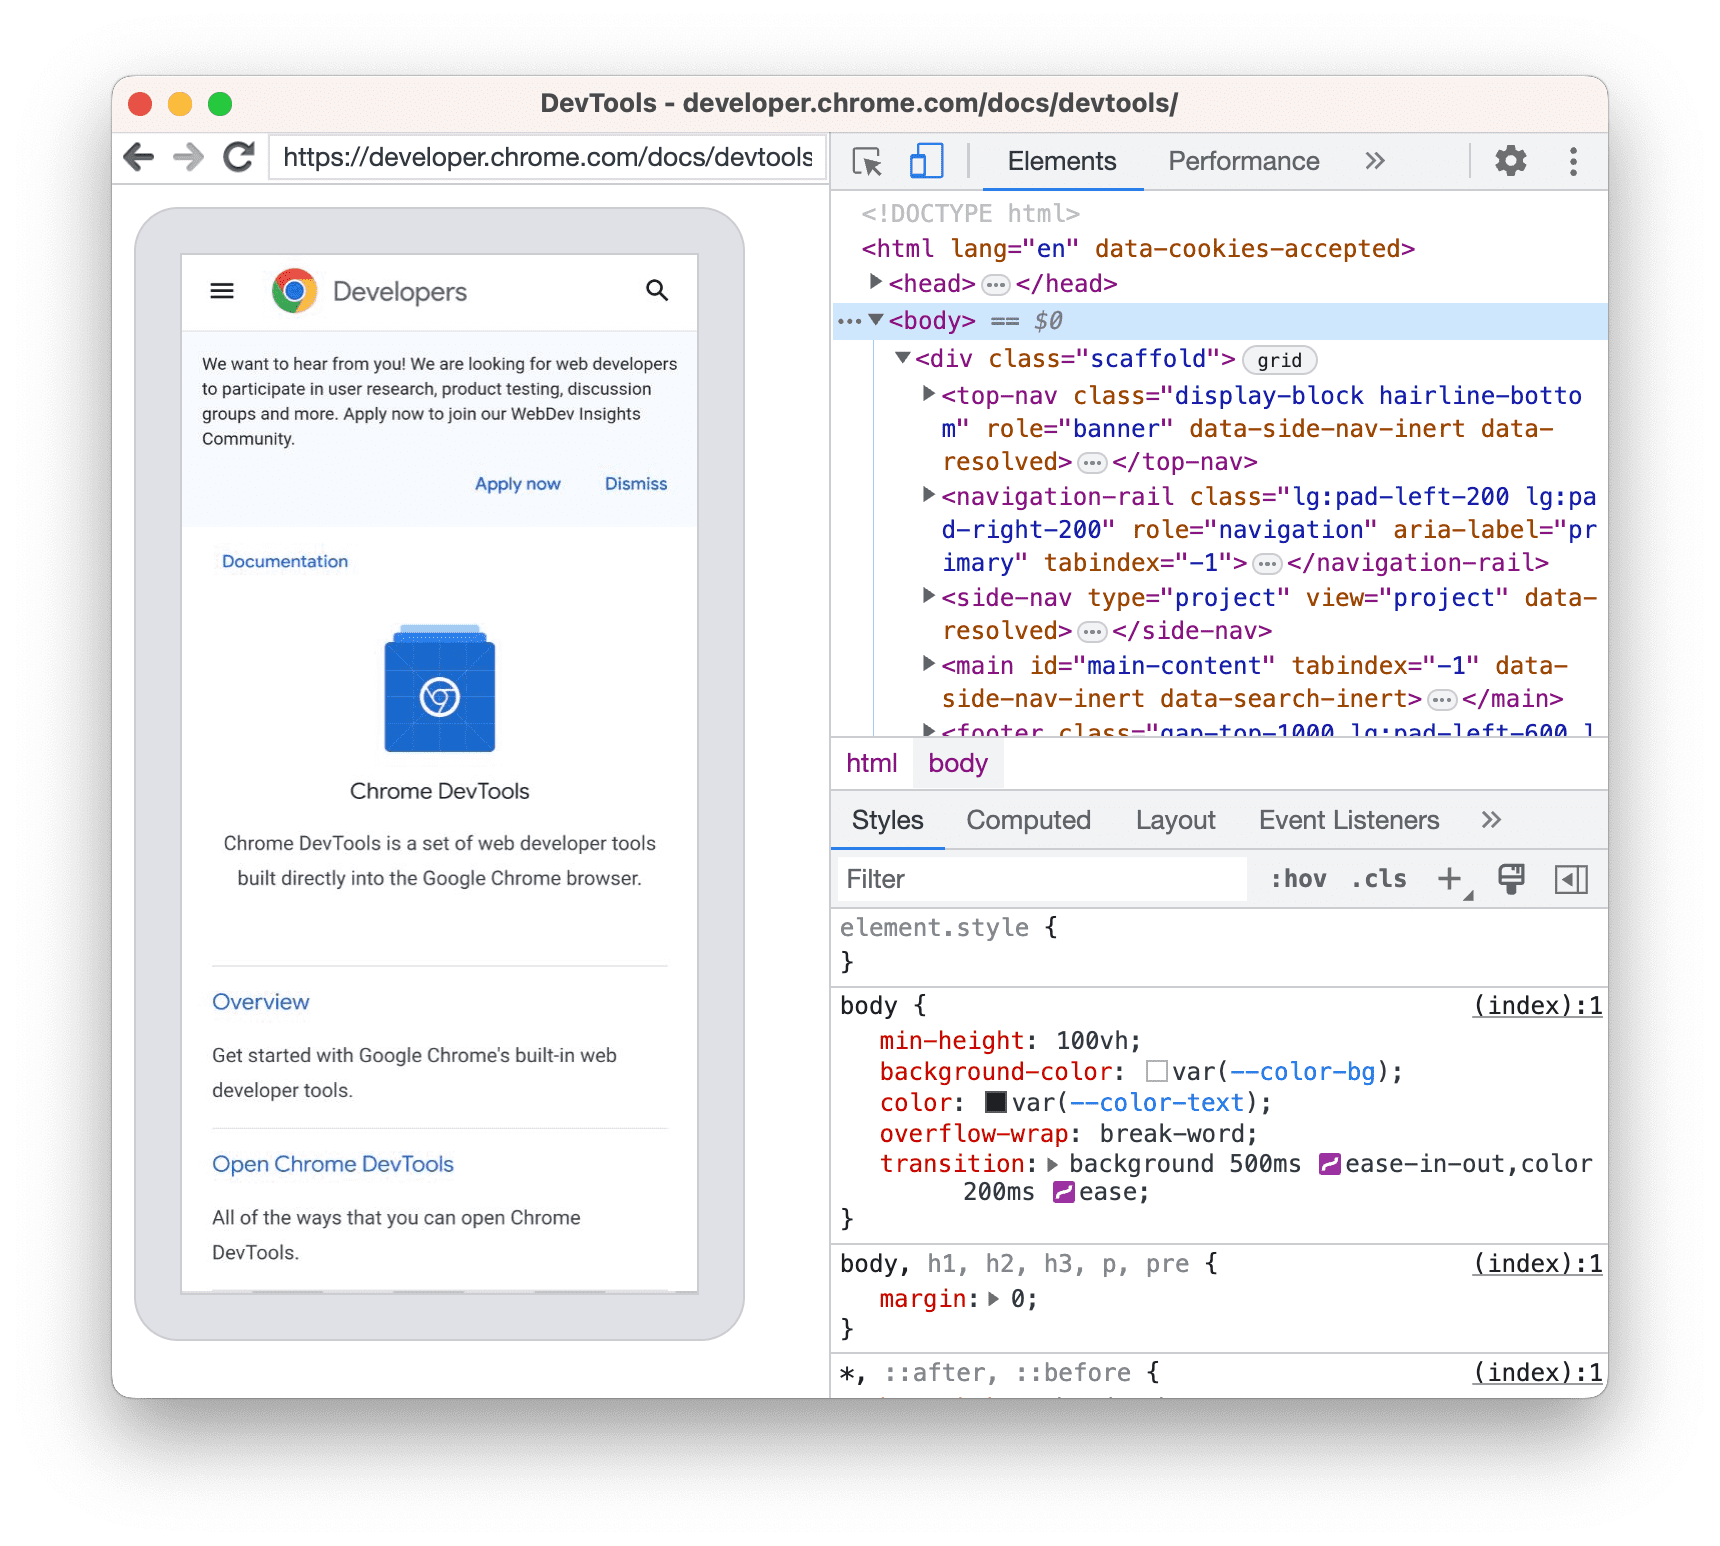 A new DevTools instance for the remote tab.